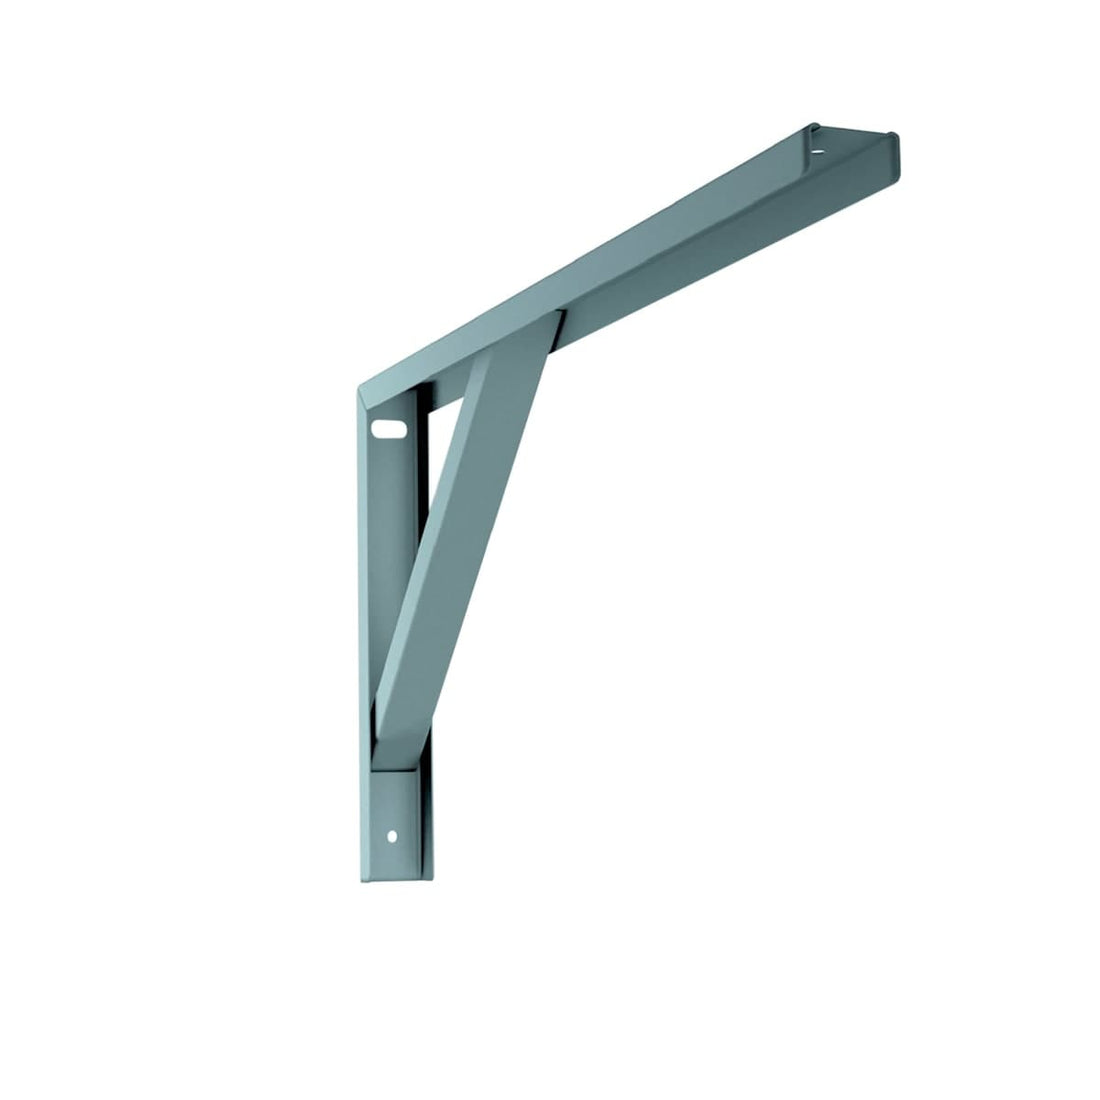 ROBUST SIDING RAIL D50xH27.3CM LOAD CAPACITY 30KG IN GALVANIZED METAL